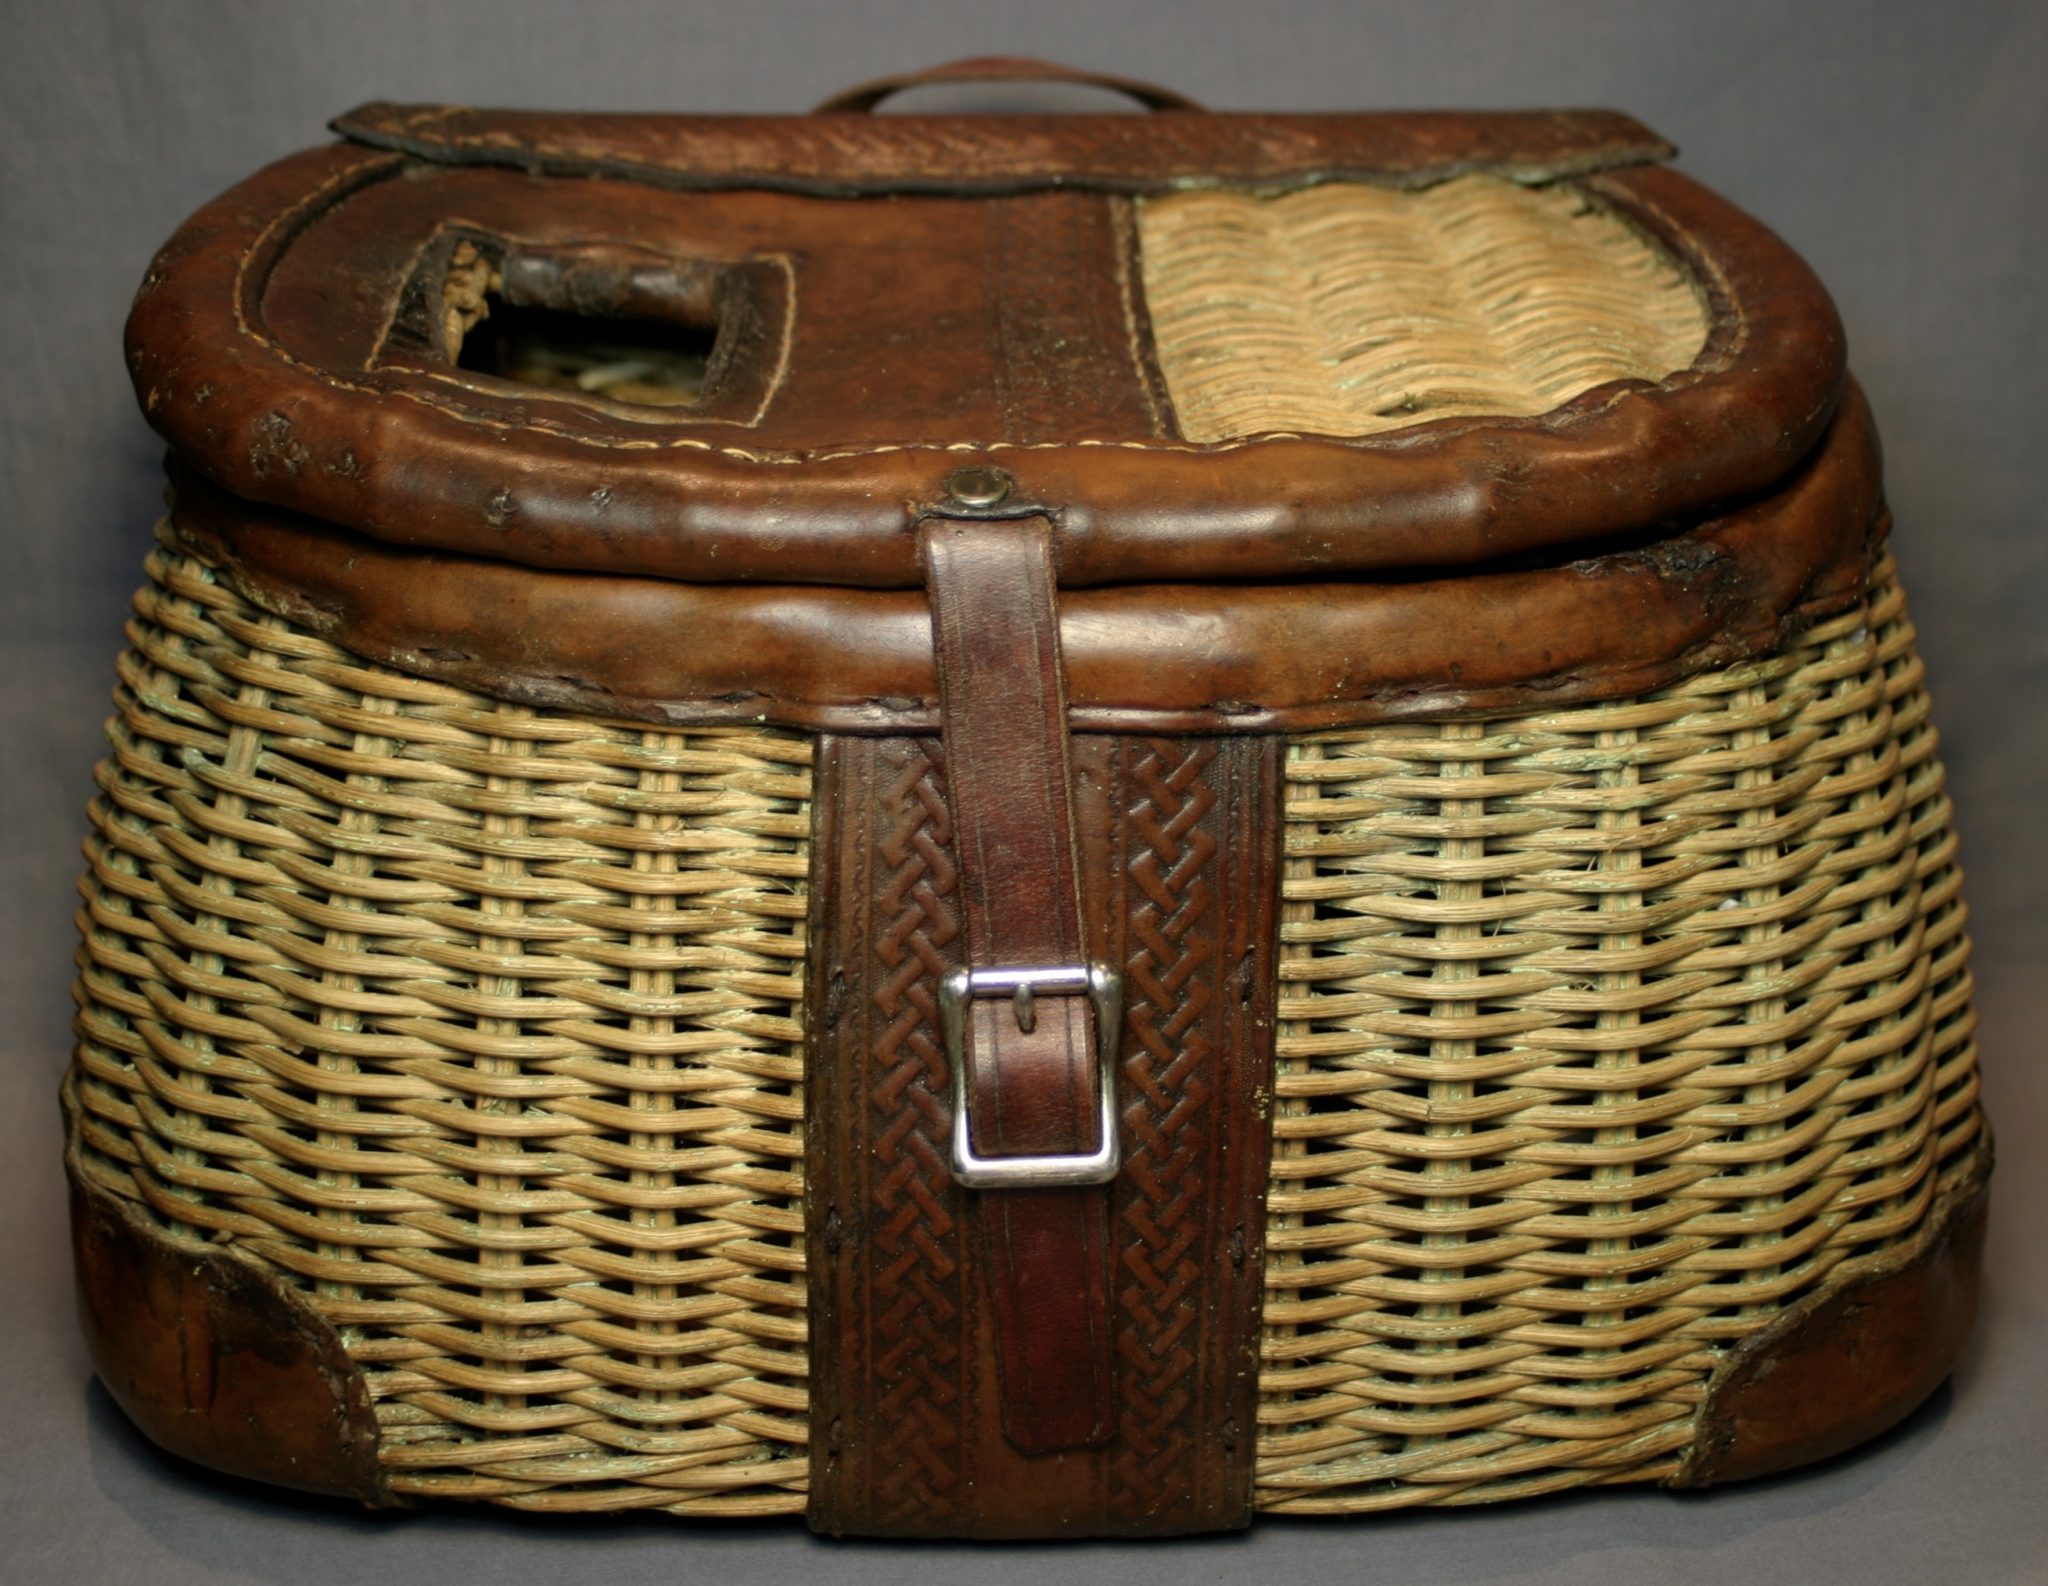 Antique Wicker Creel Basket For Trout Fishing